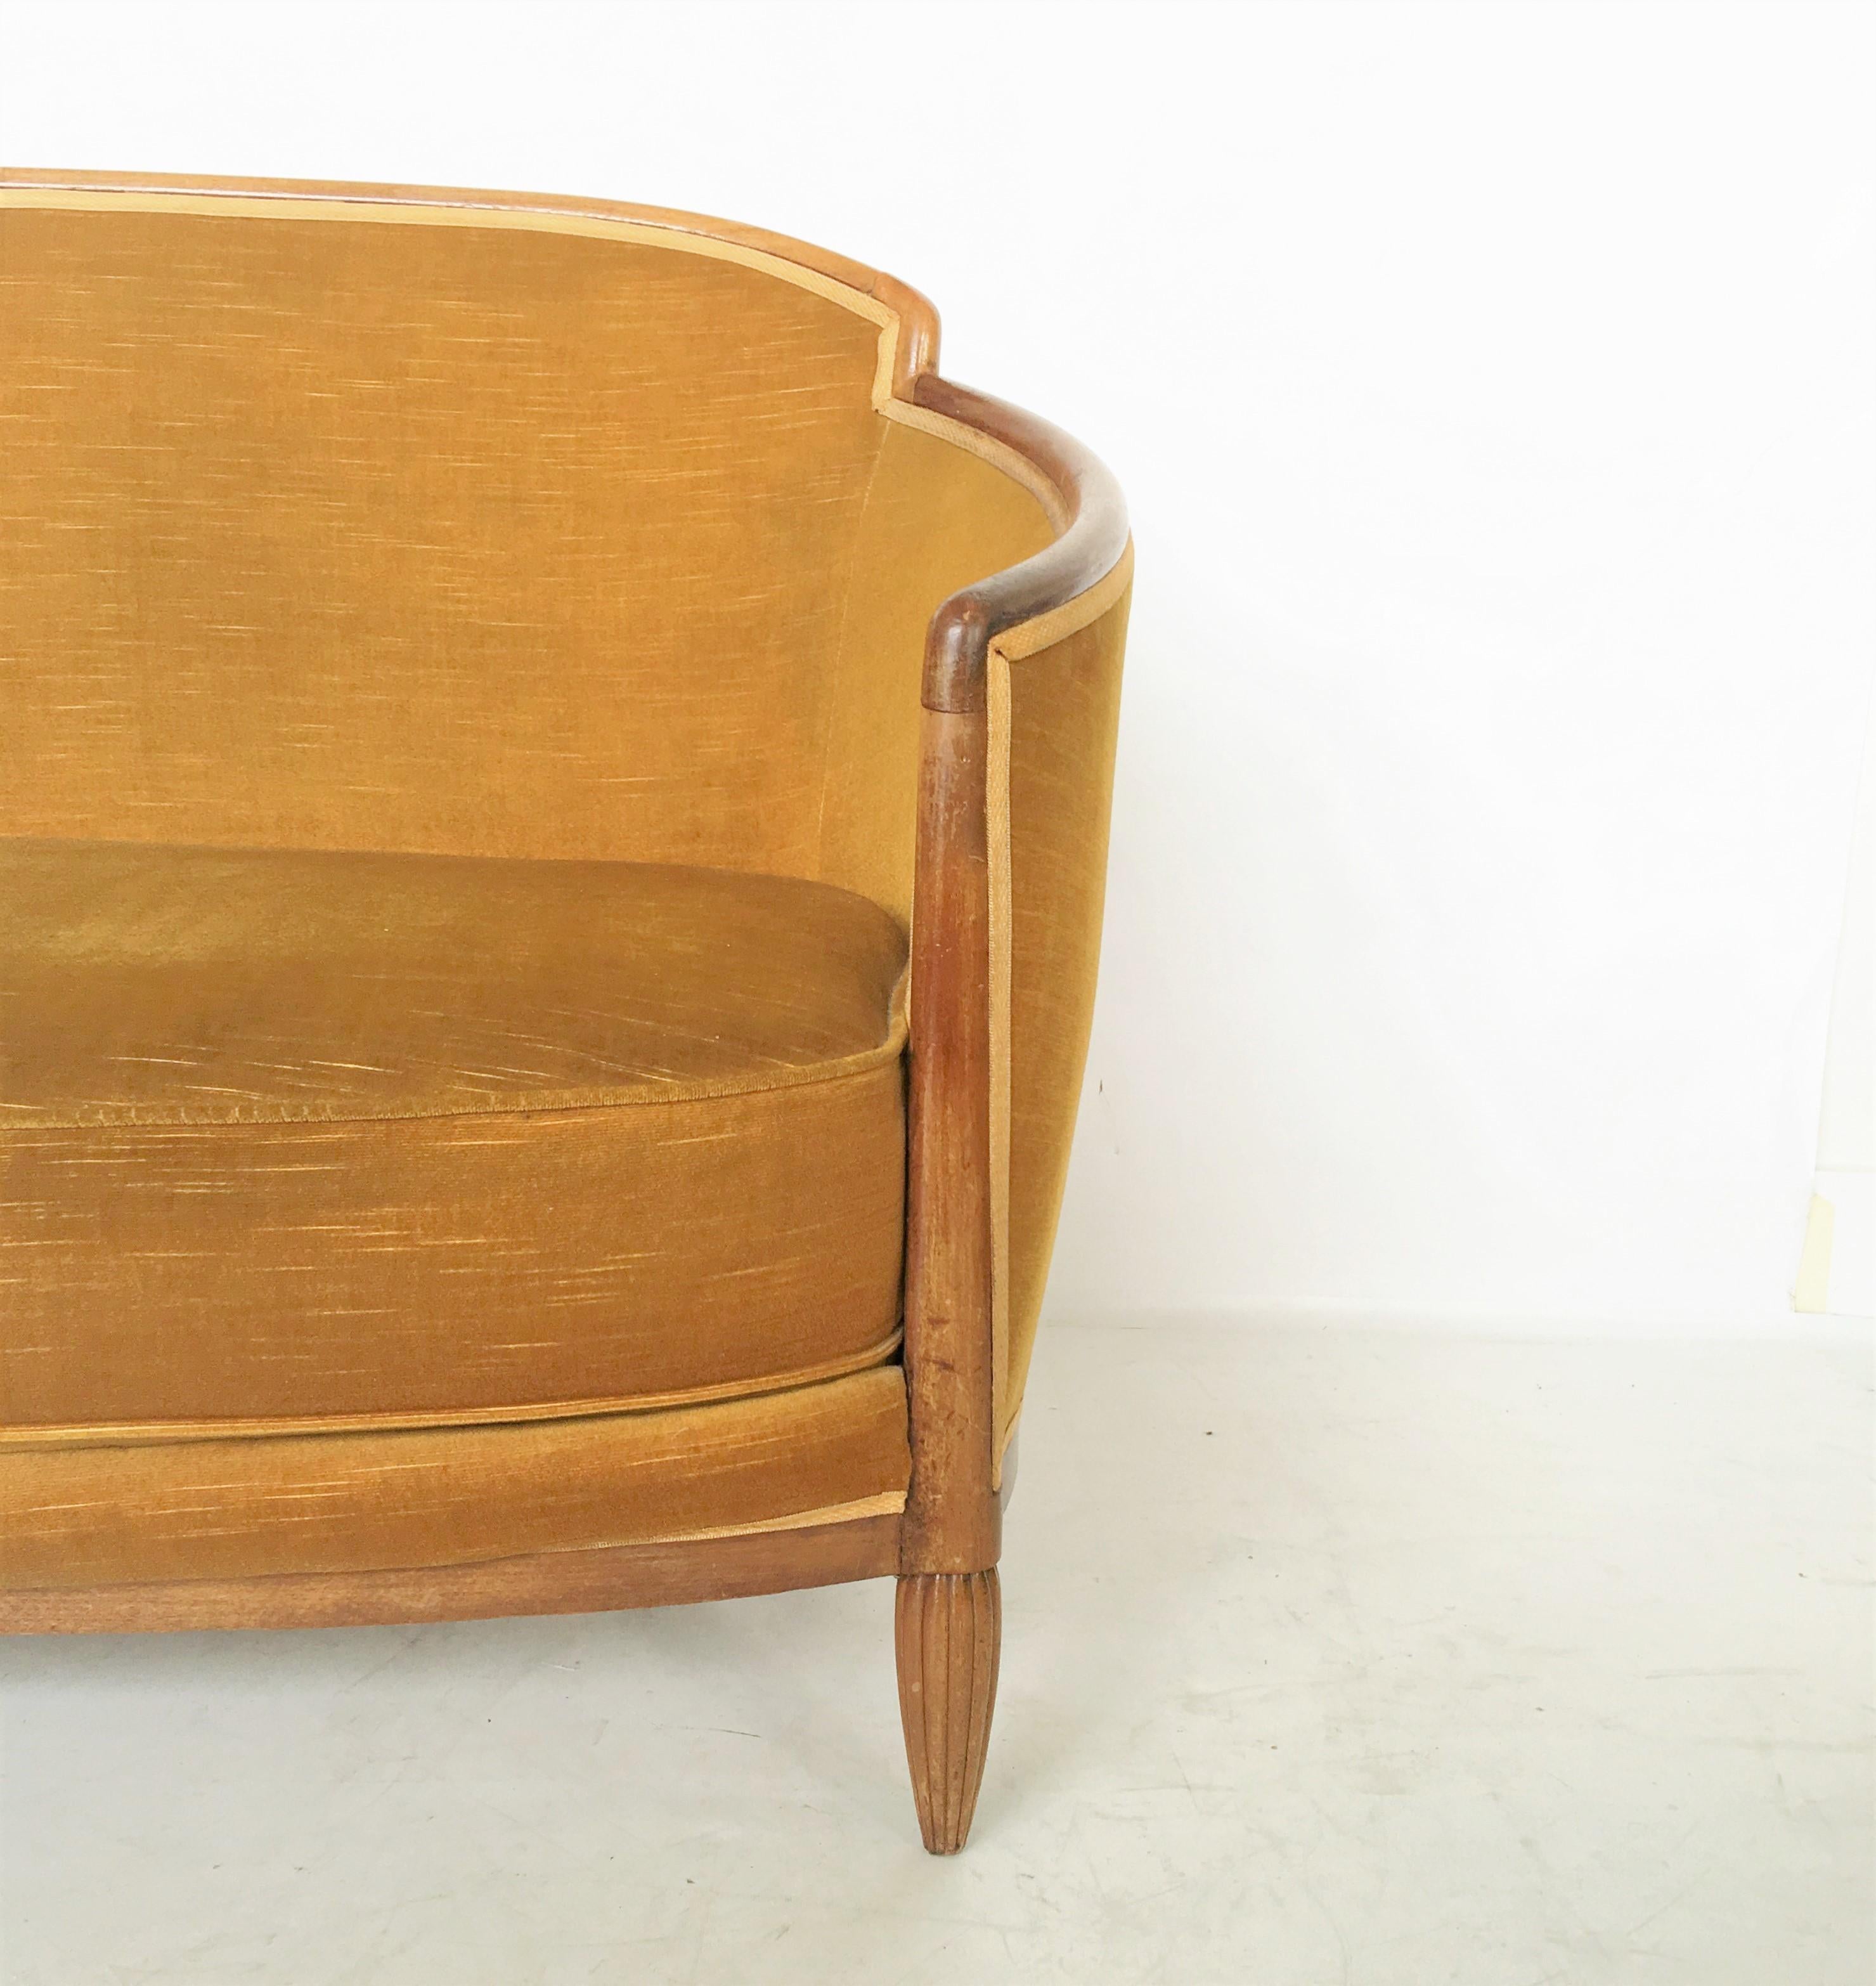 Gorgeous French Art Deco salon settee designed by the top Art Deco designer Paul Follot, circa 1925. Who combined traditional forms with rich decoration. The settee has a sweeping curved backrest extending over solid armrests and resting on reeded